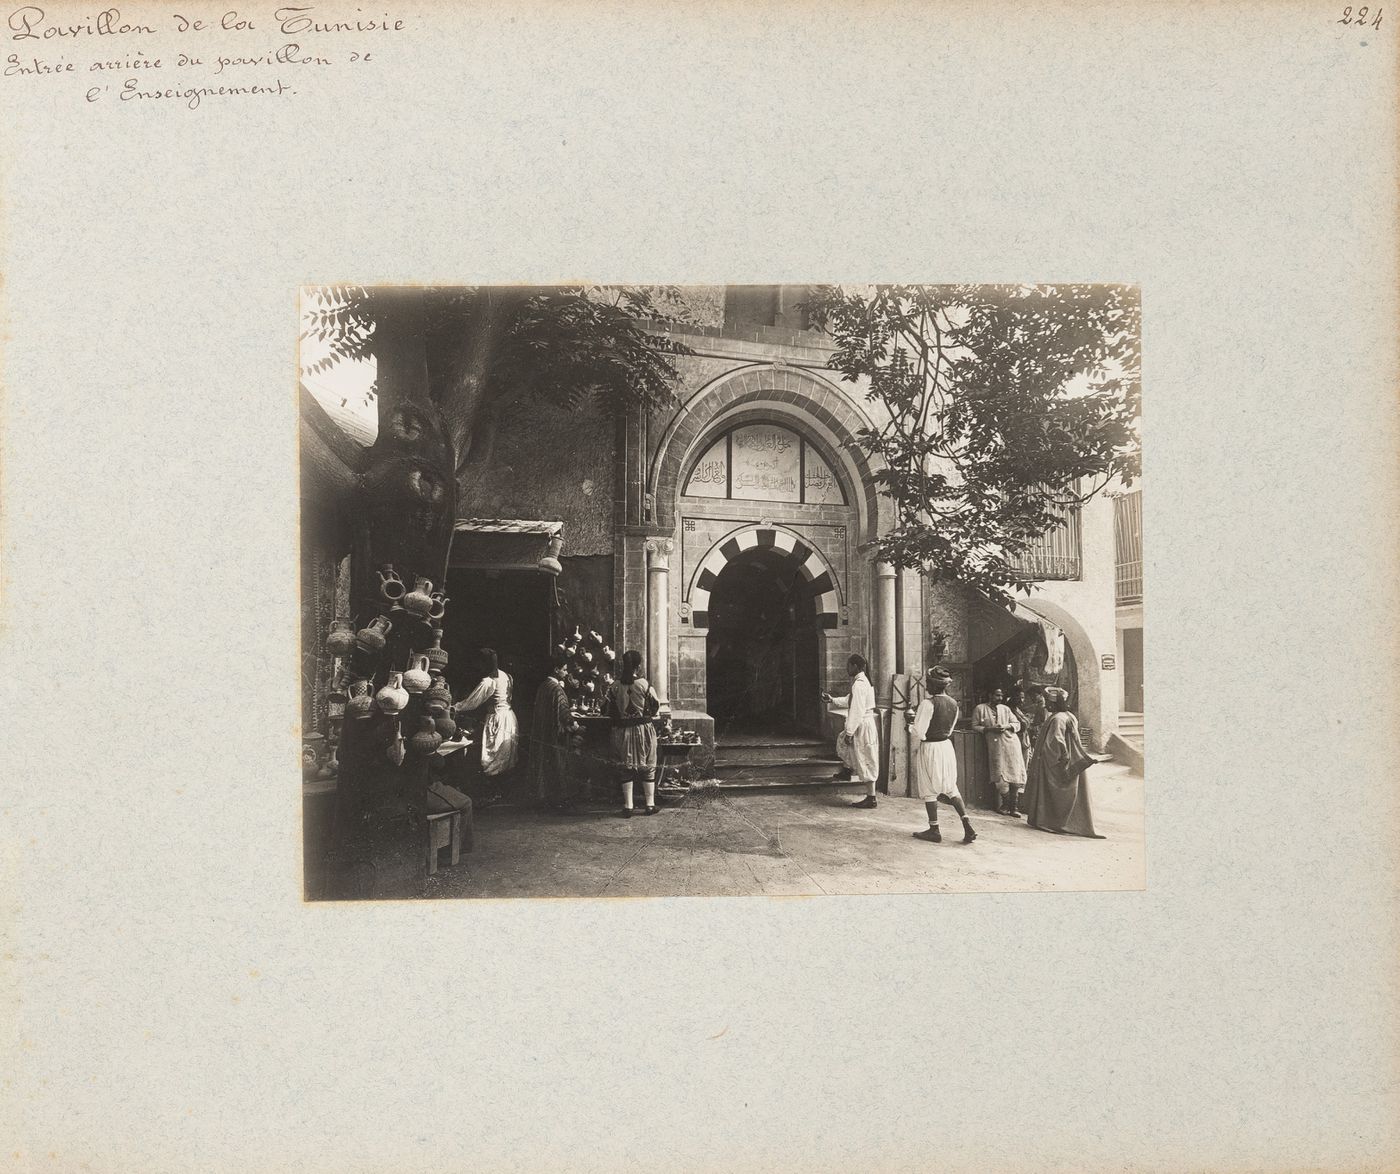 View of people near back entrance to pavilion of the Direction de l'enseignement, Tunisian section, Exposition universelle, 1900, Paris France